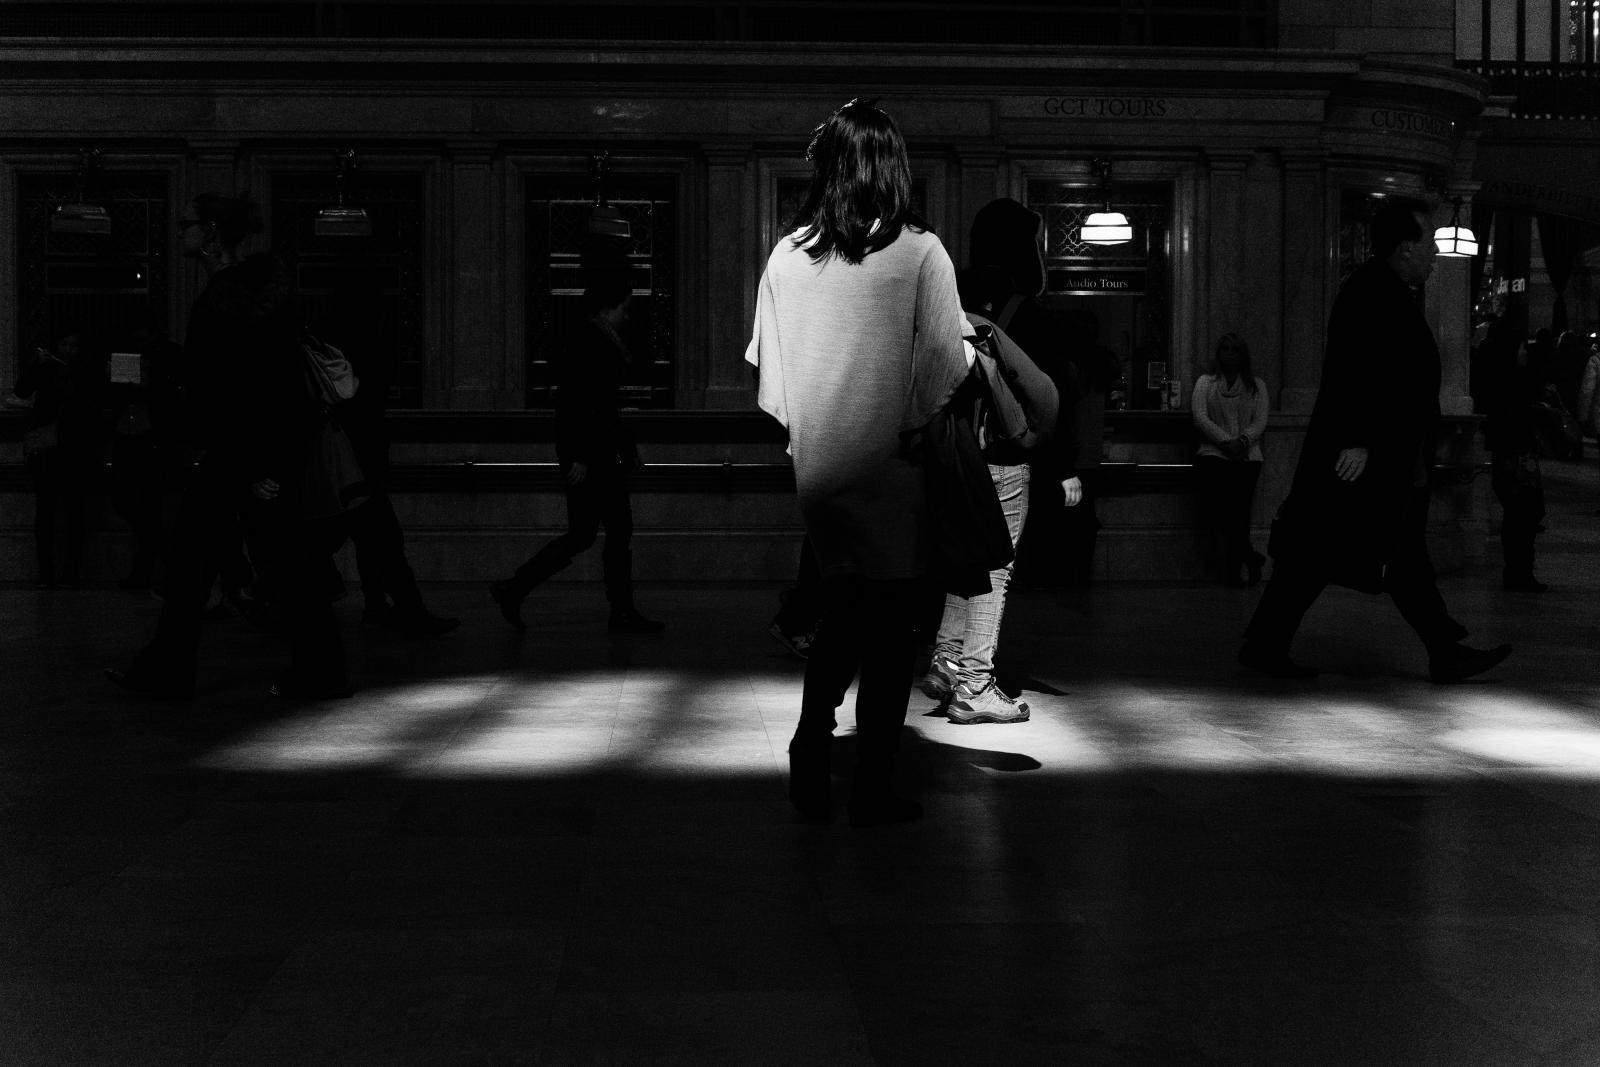 Grand Central commuter